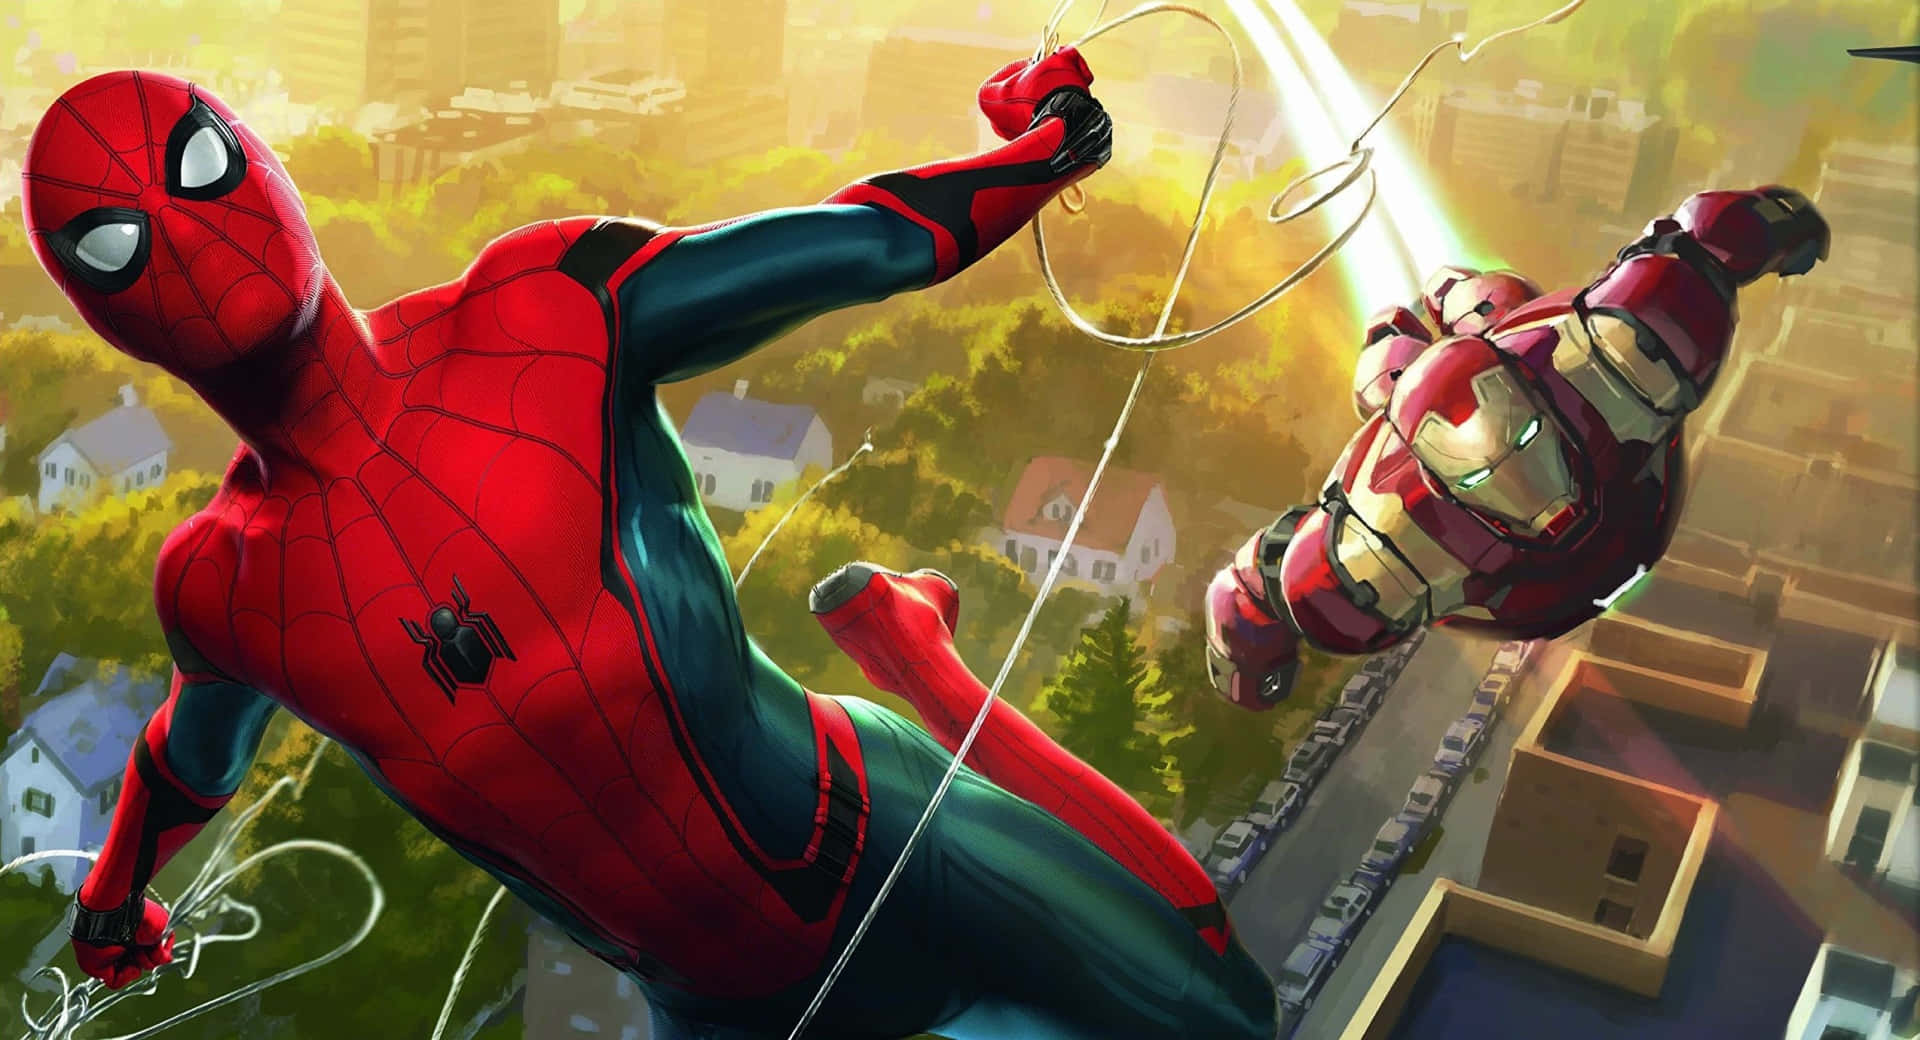 Ready for Action! Peter Parker suit up as the Friendly Neighbor Spider-Man to take on the Vulture in Spider-Man Homecoming Wallpaper